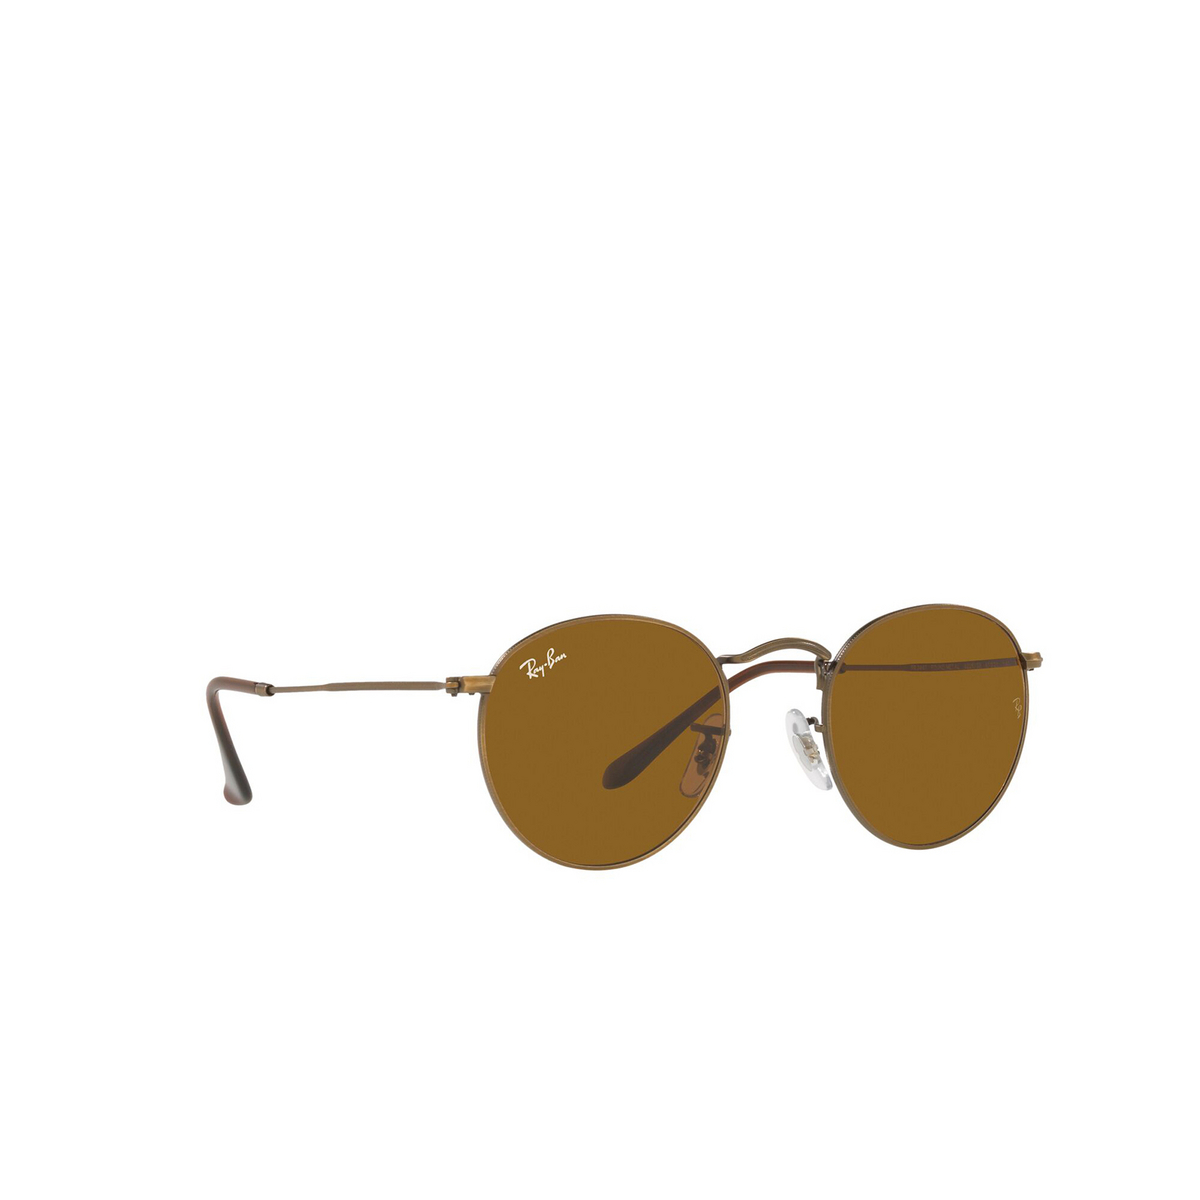 Ray-Ban ROUND METAL Sunglasses 922833 Antique Gold - three-quarters view